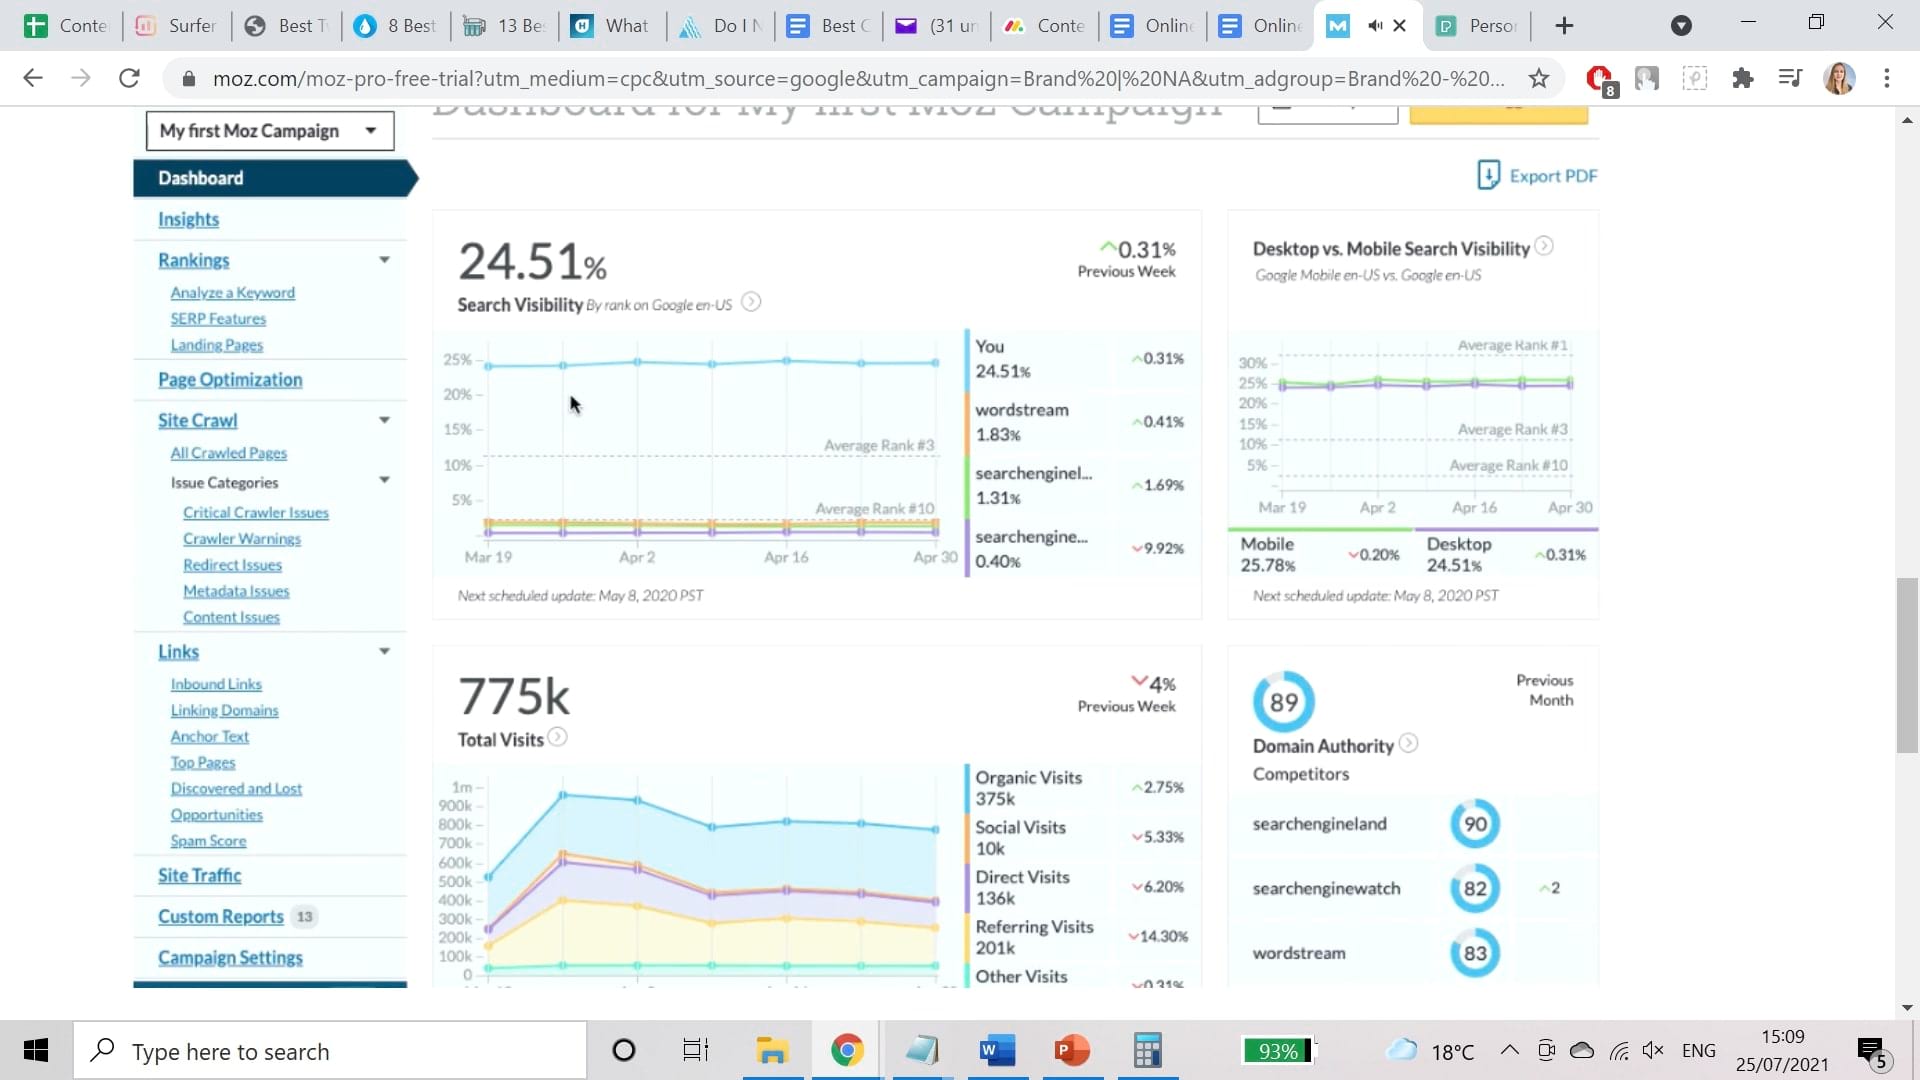 Get an online seo analysis report from Moz Pro Tools